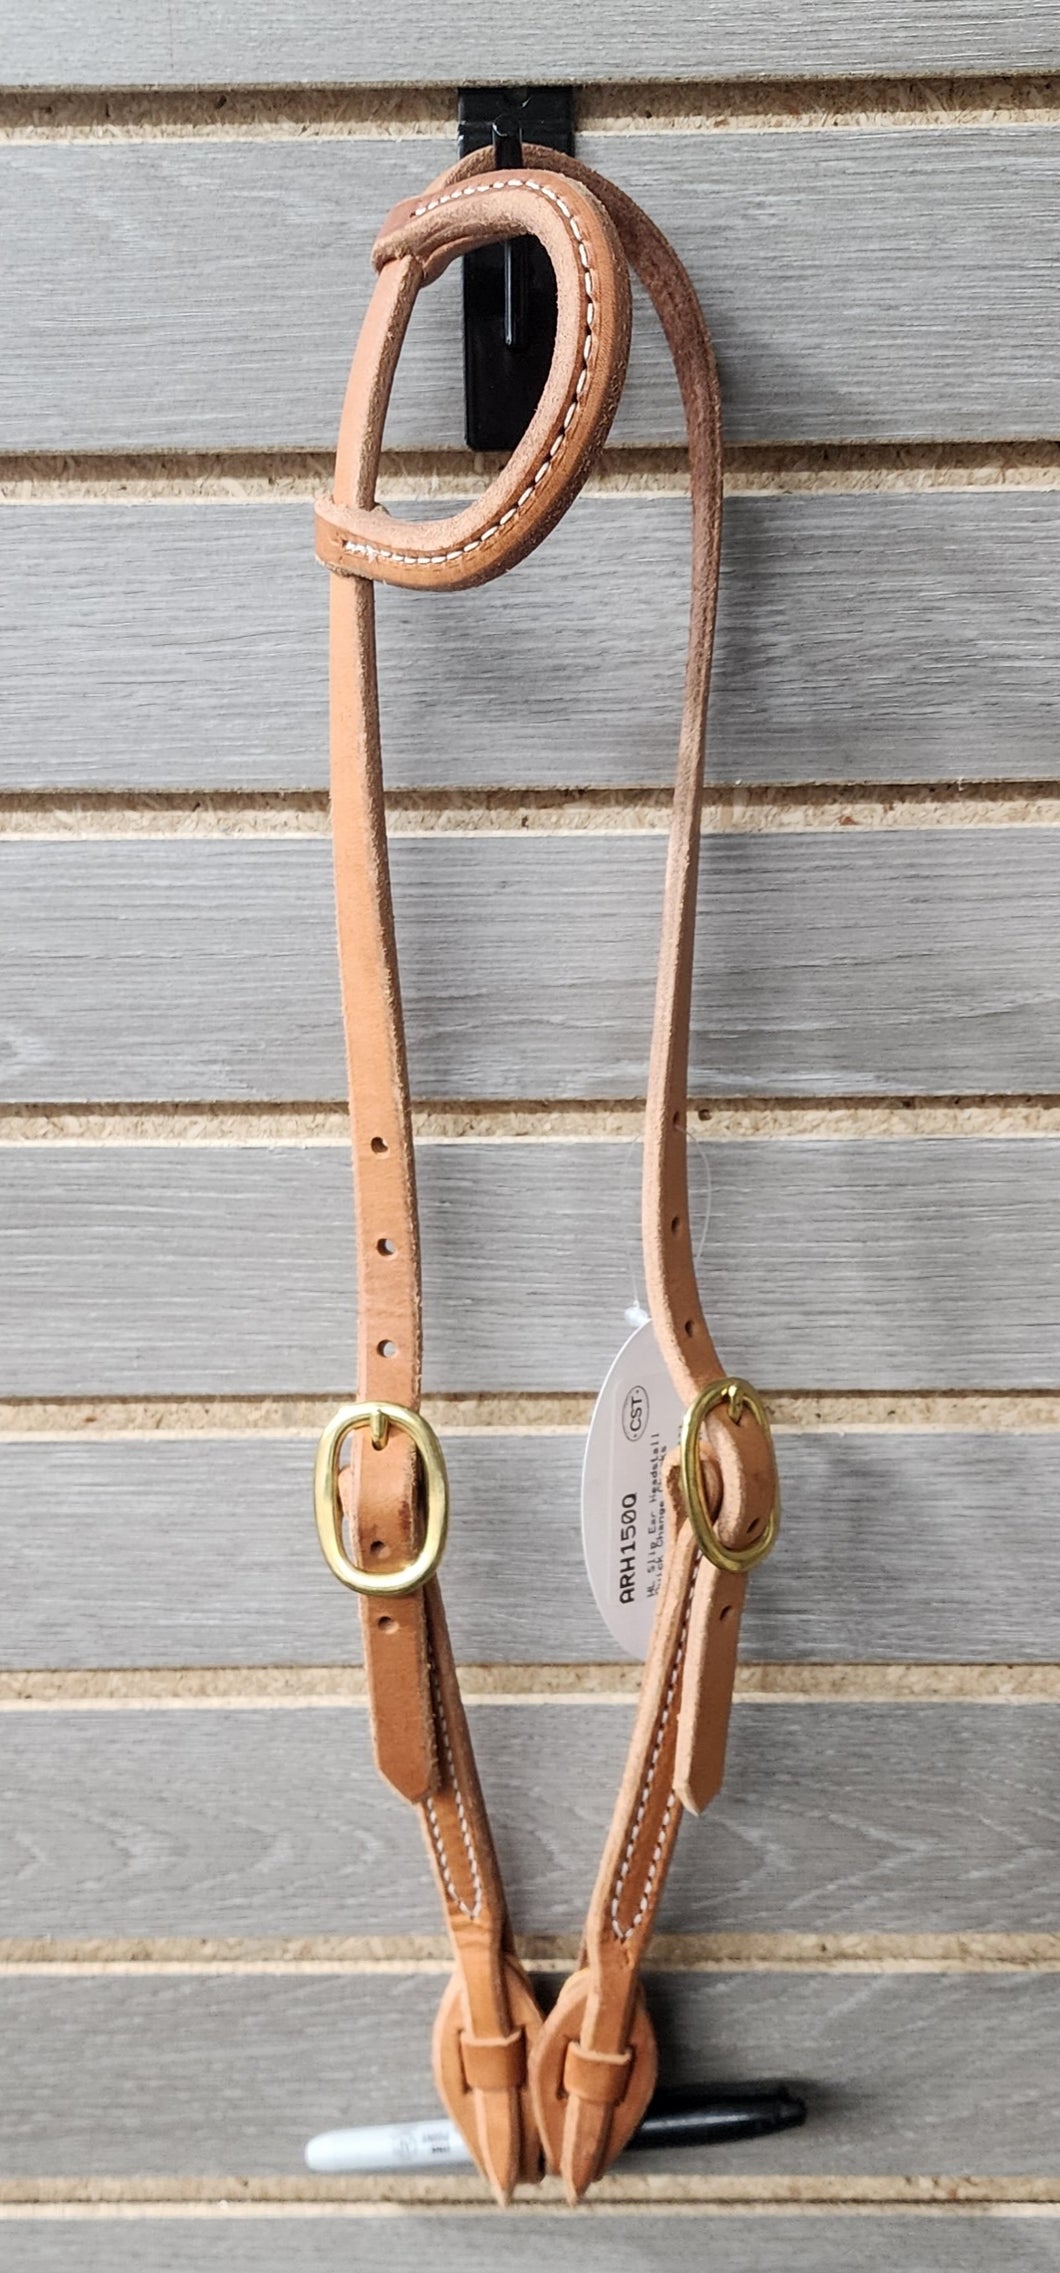 CST One Ear Headstall with Quick Change Cheeks